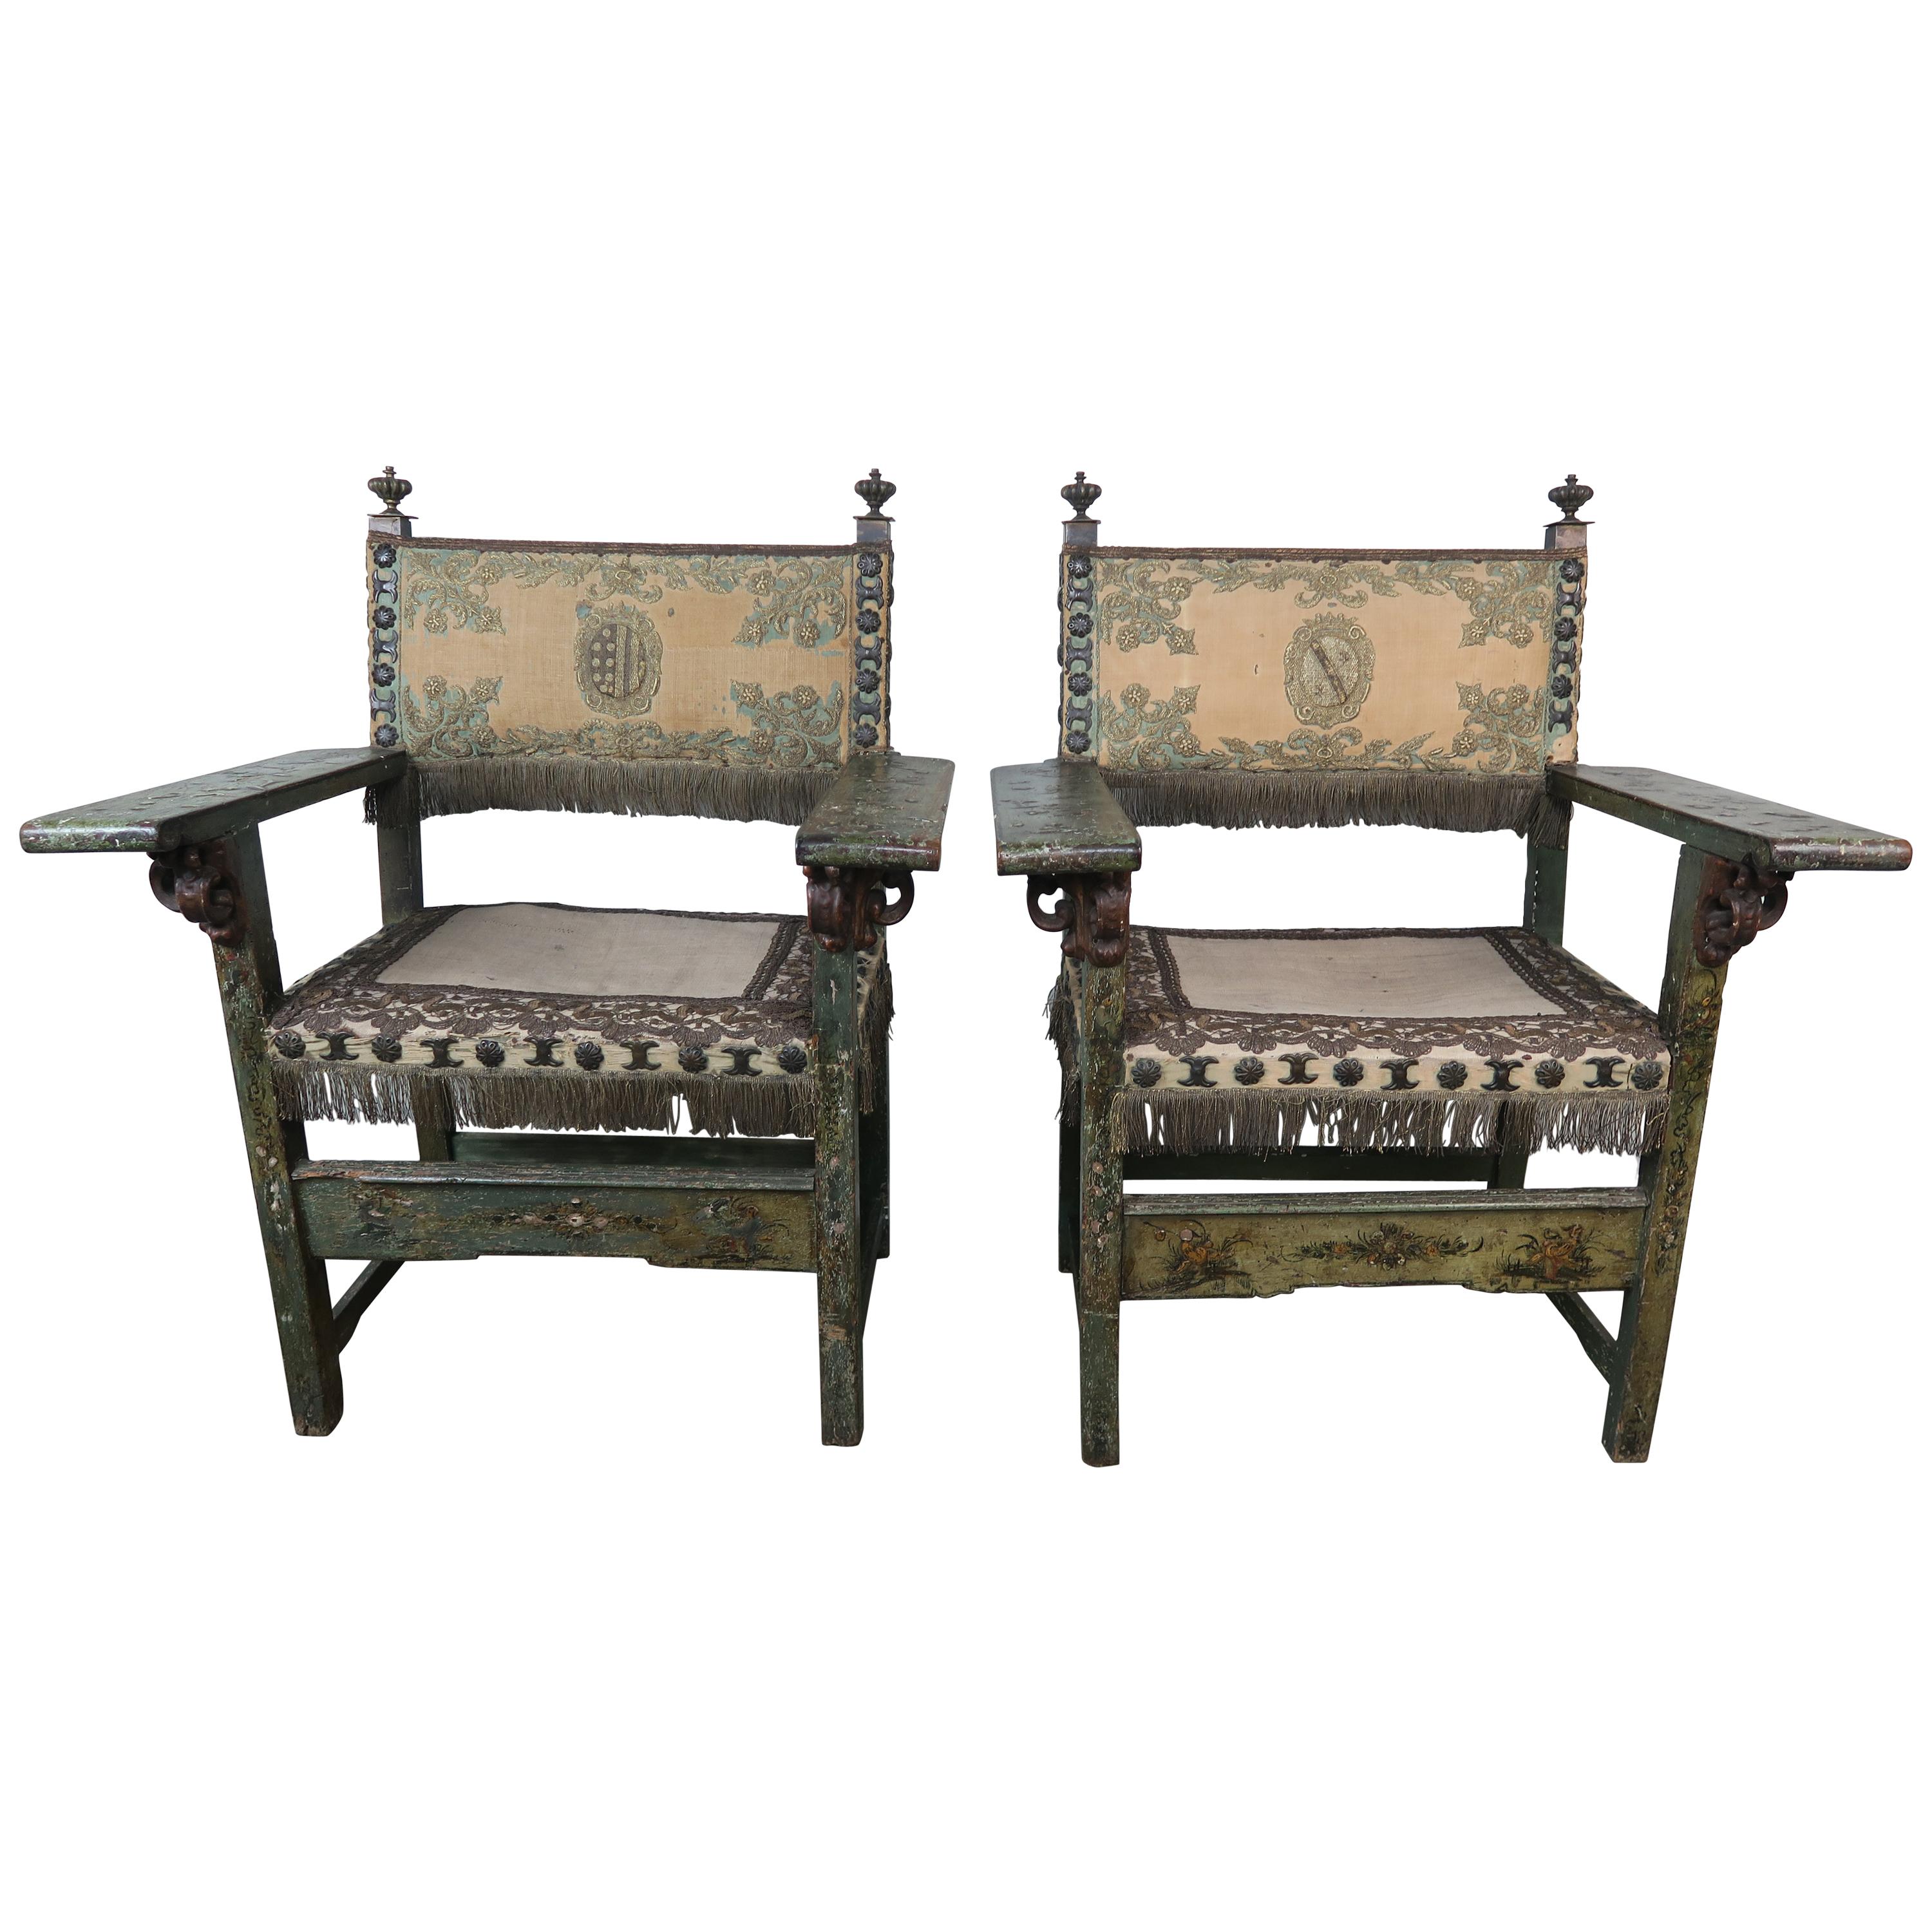 18th Century Spanish Colonial Painted Armchairs with Metallic Embroidery